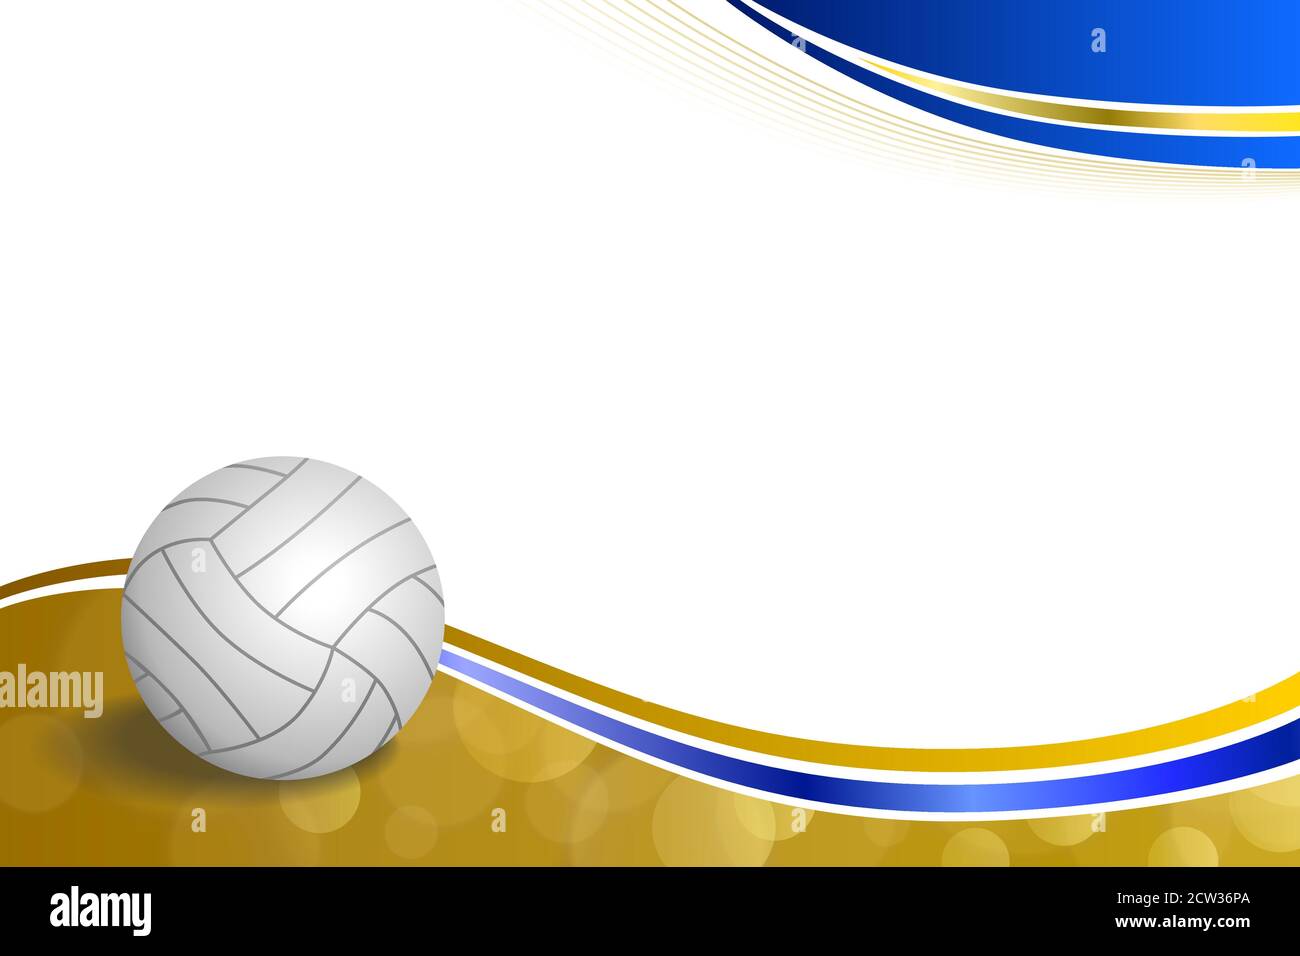 Background abstract sport volleyball blue yellow ball frame illustration vector Stock Vector